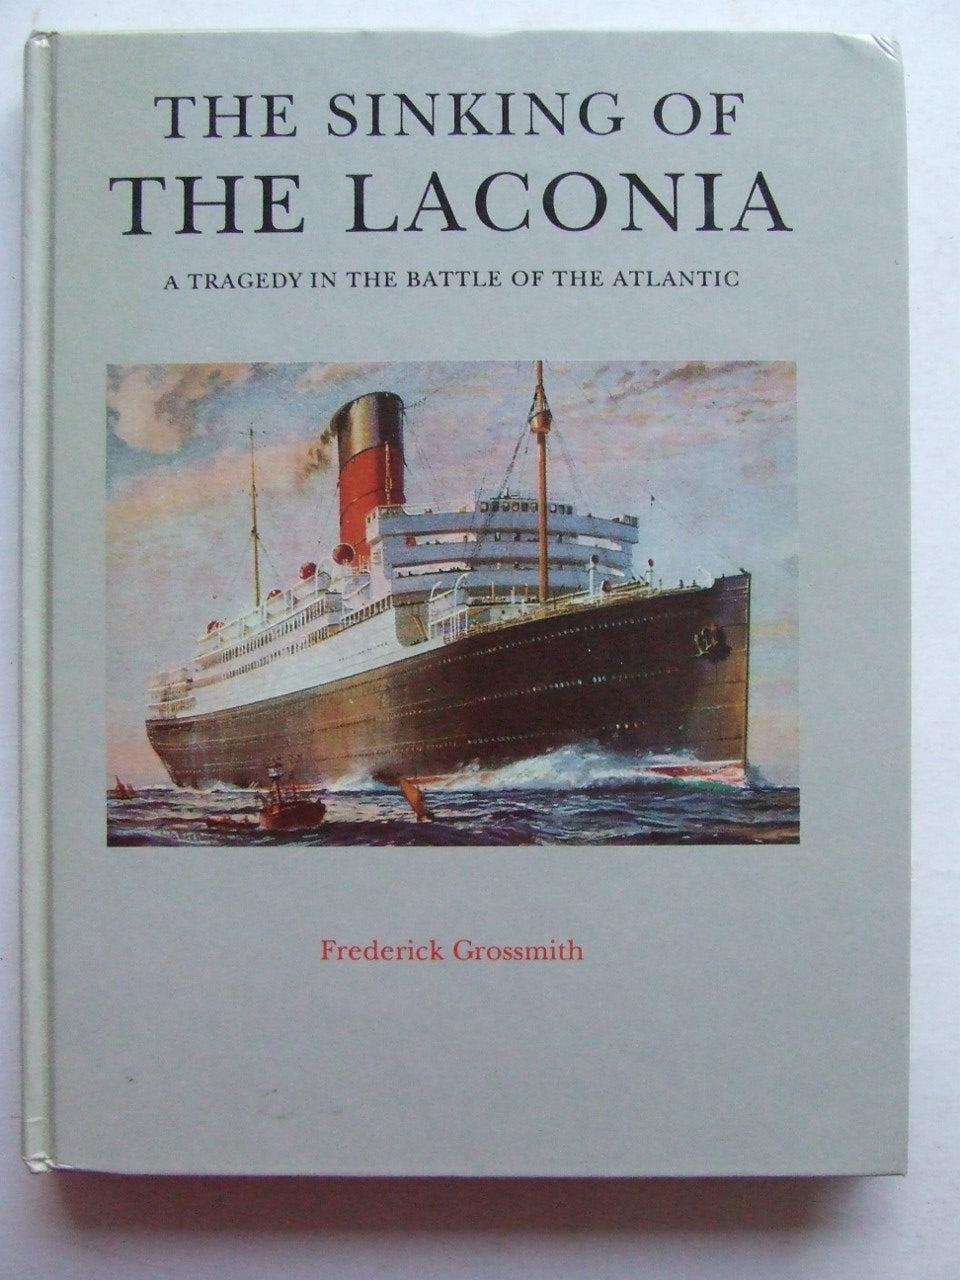 Sinking of the Laconia, a tragedy in the Battle of the Atlantic